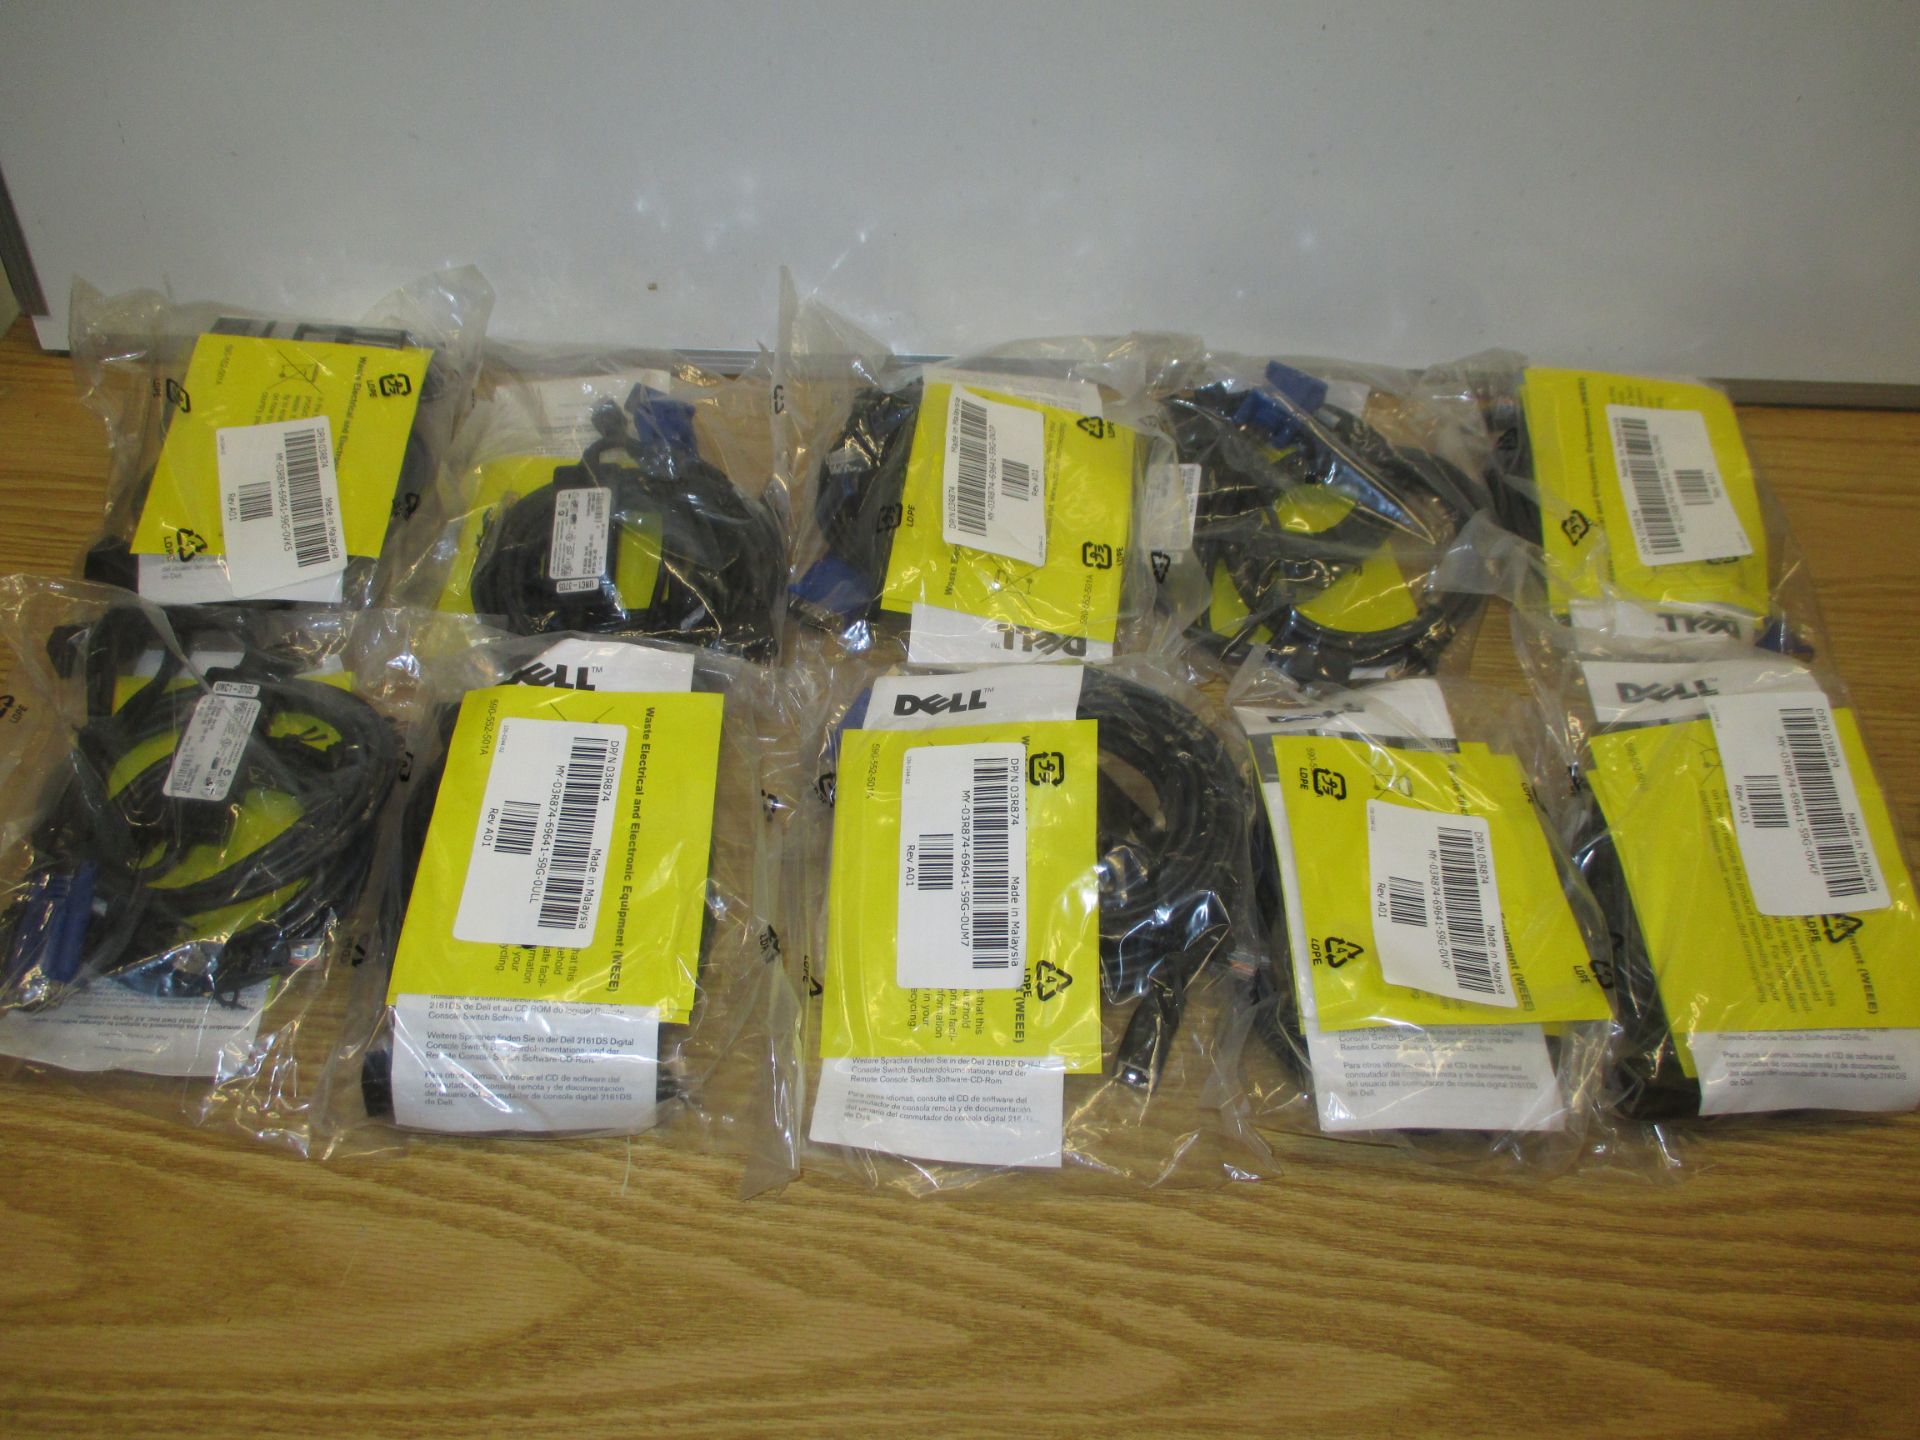 10 X Dell USB SIP Server Interface Pod Cable Kit DP/N 03R784. ALSO INCLUDES 2 X LAN CABLES DP/N